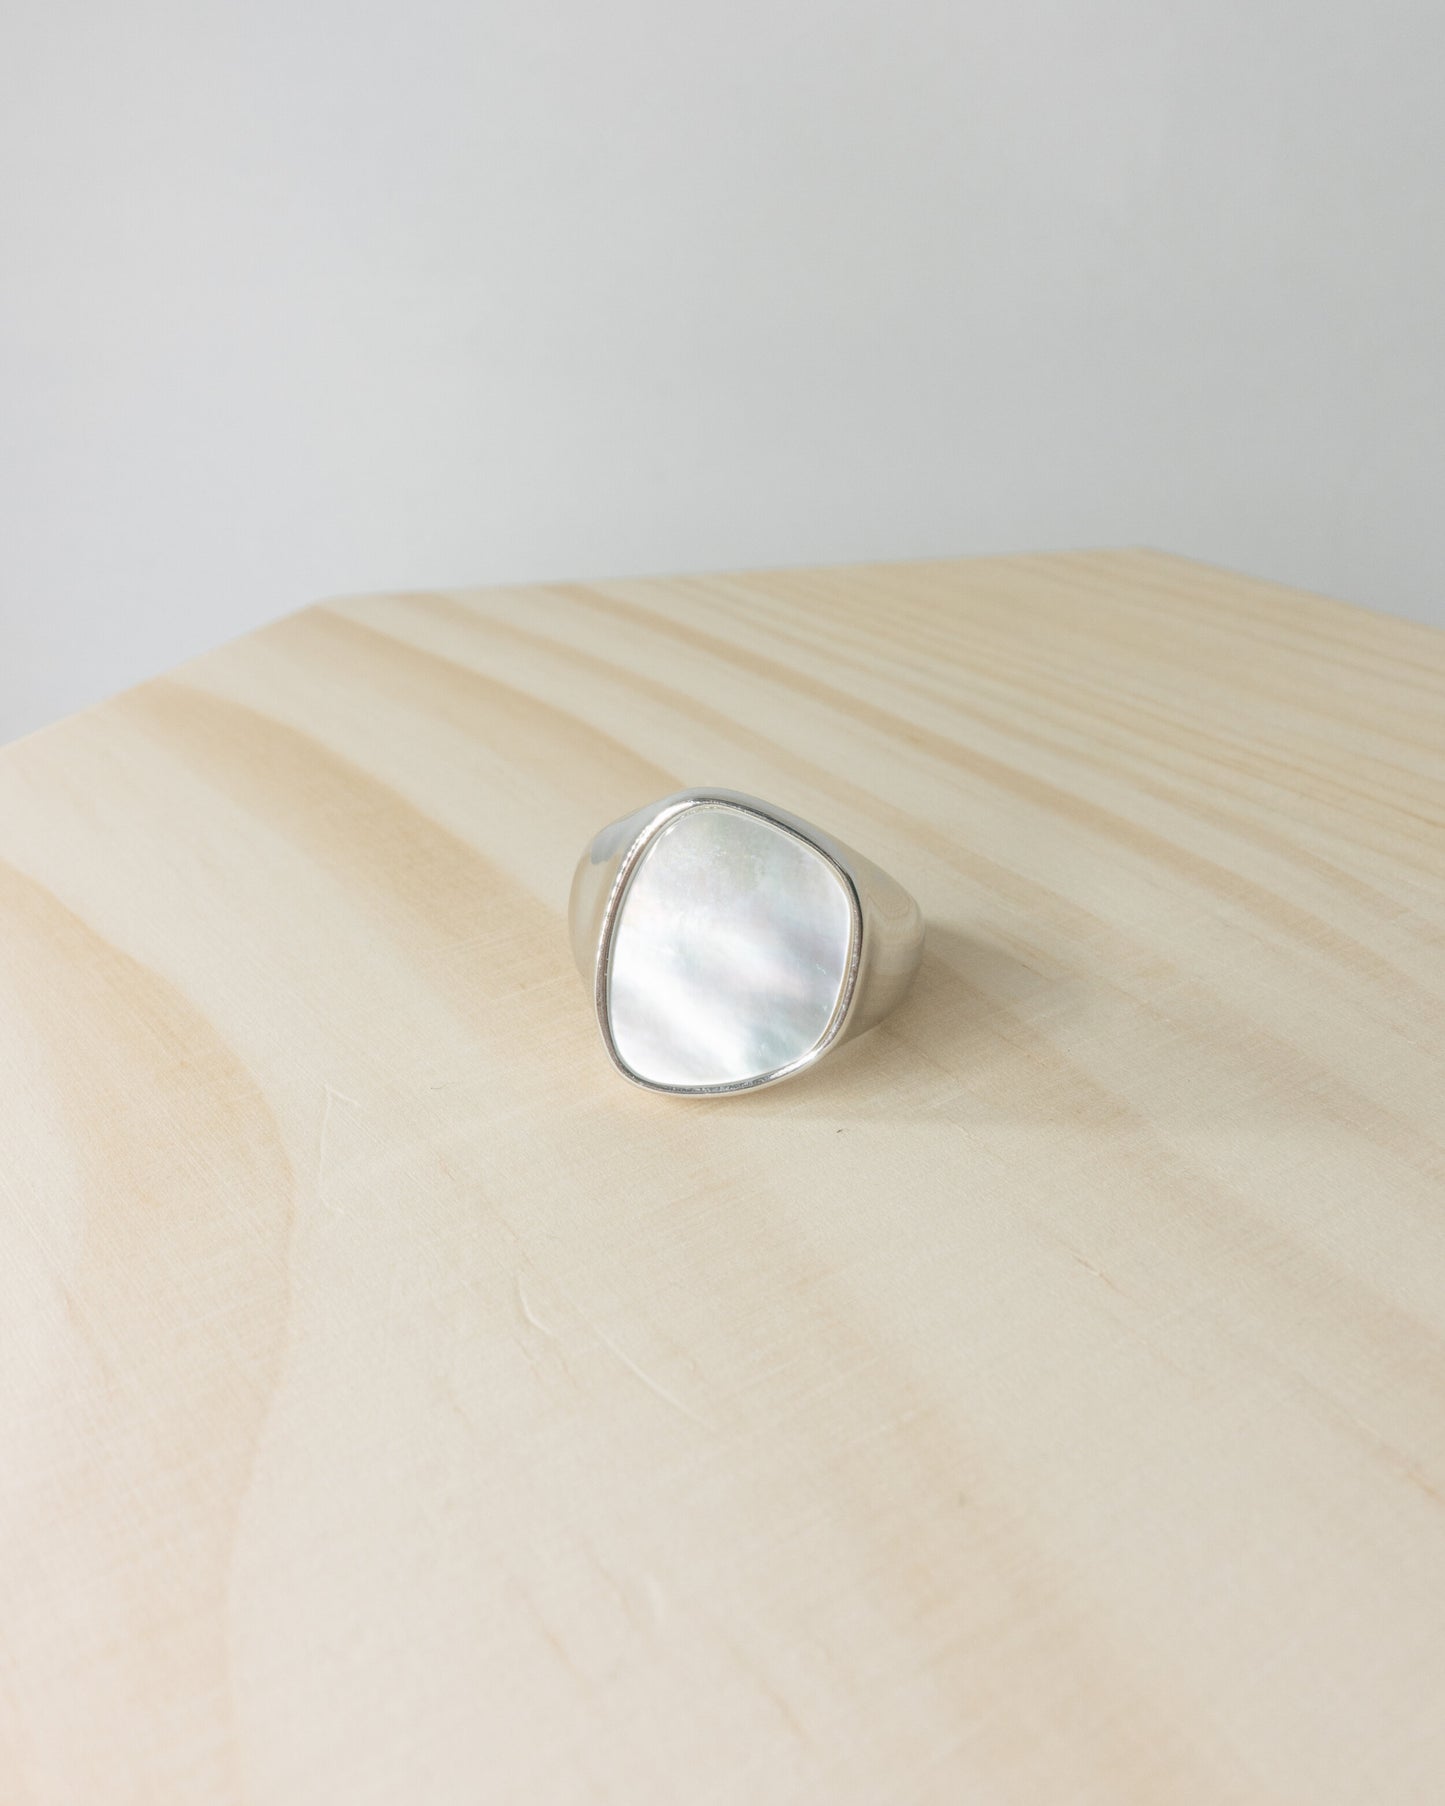 "Royal" mother of pearl statement ring